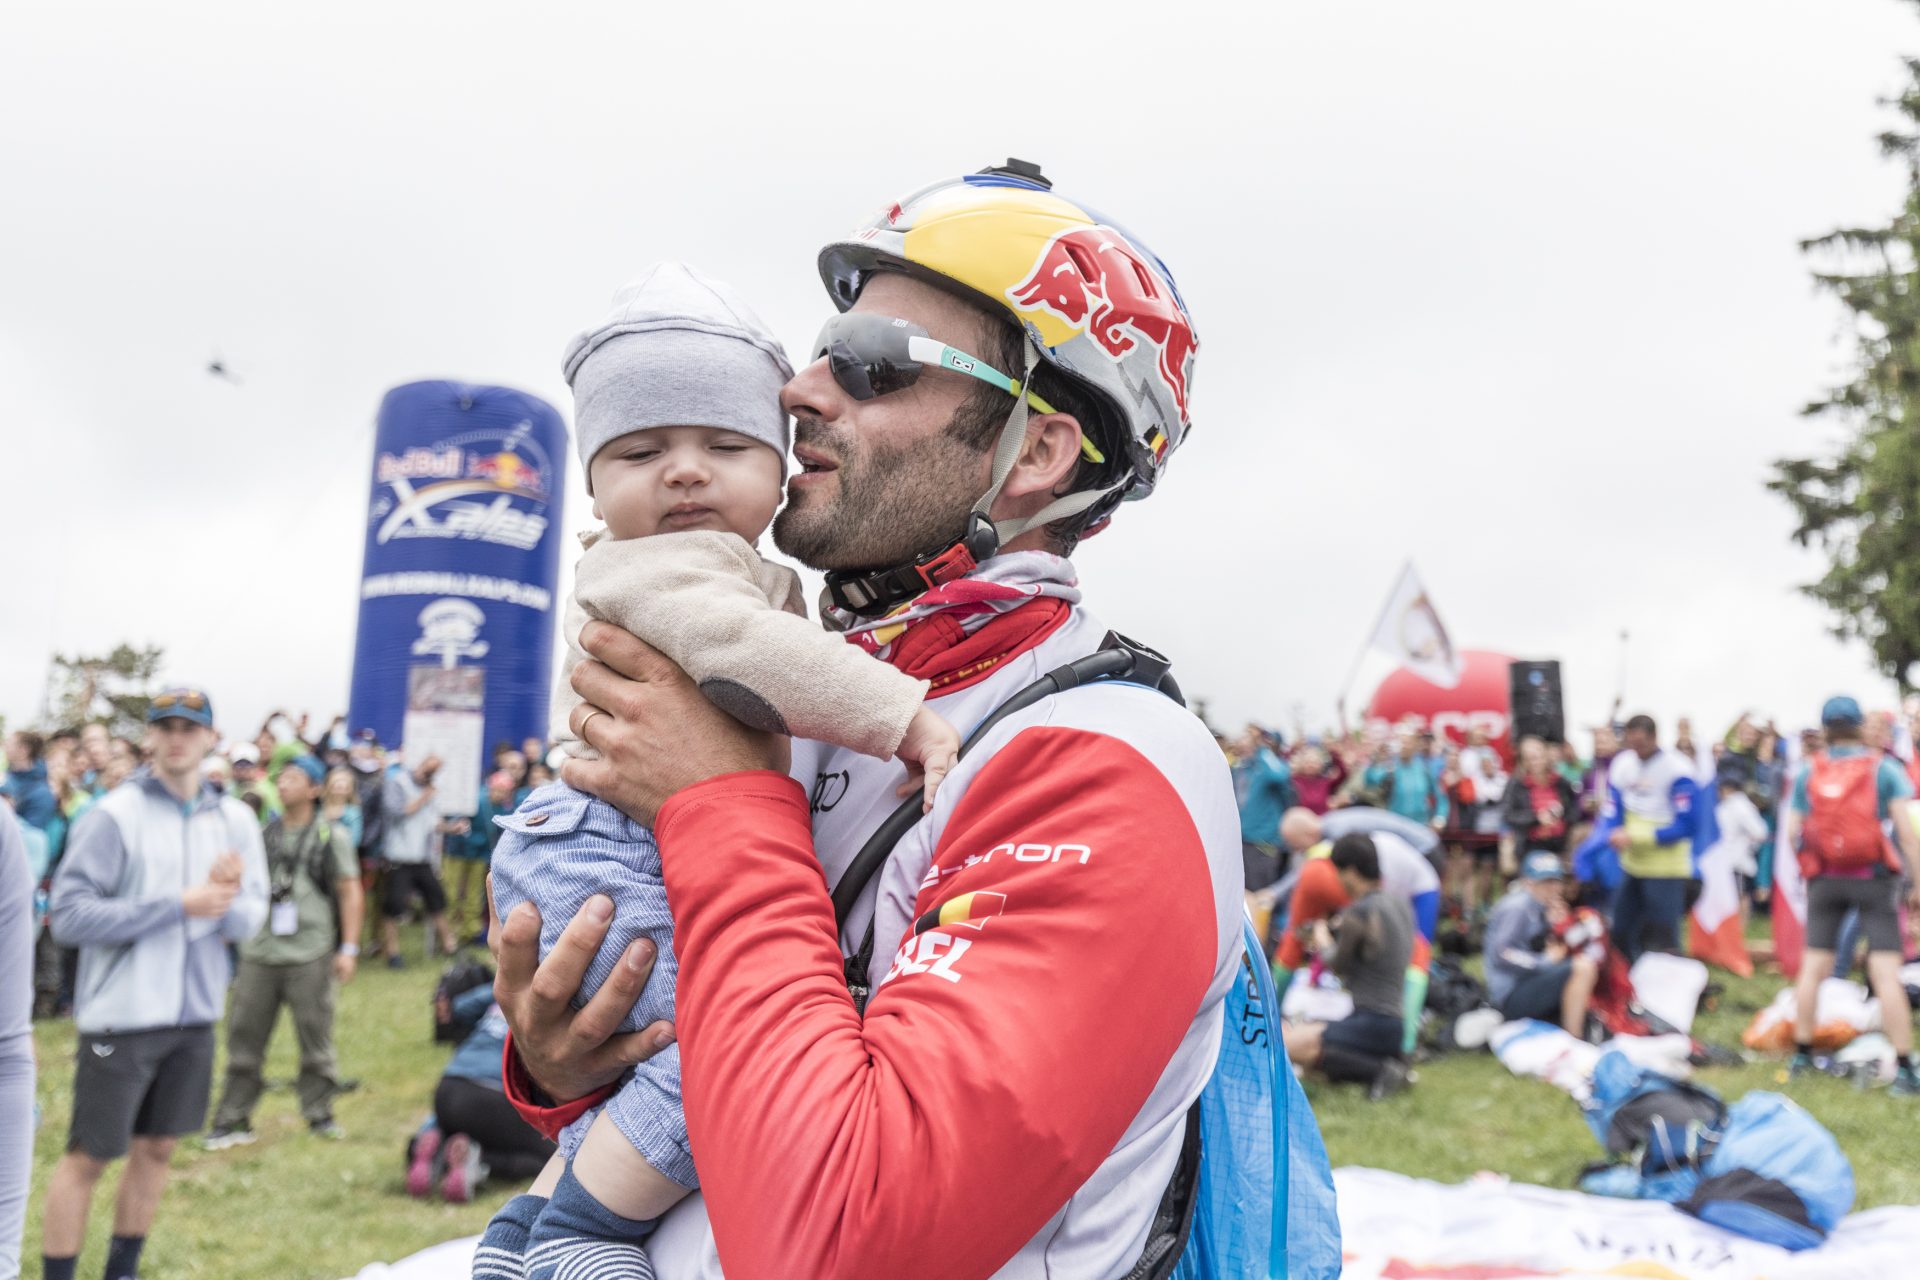 Gallery Red Bull X-Alps 2019 